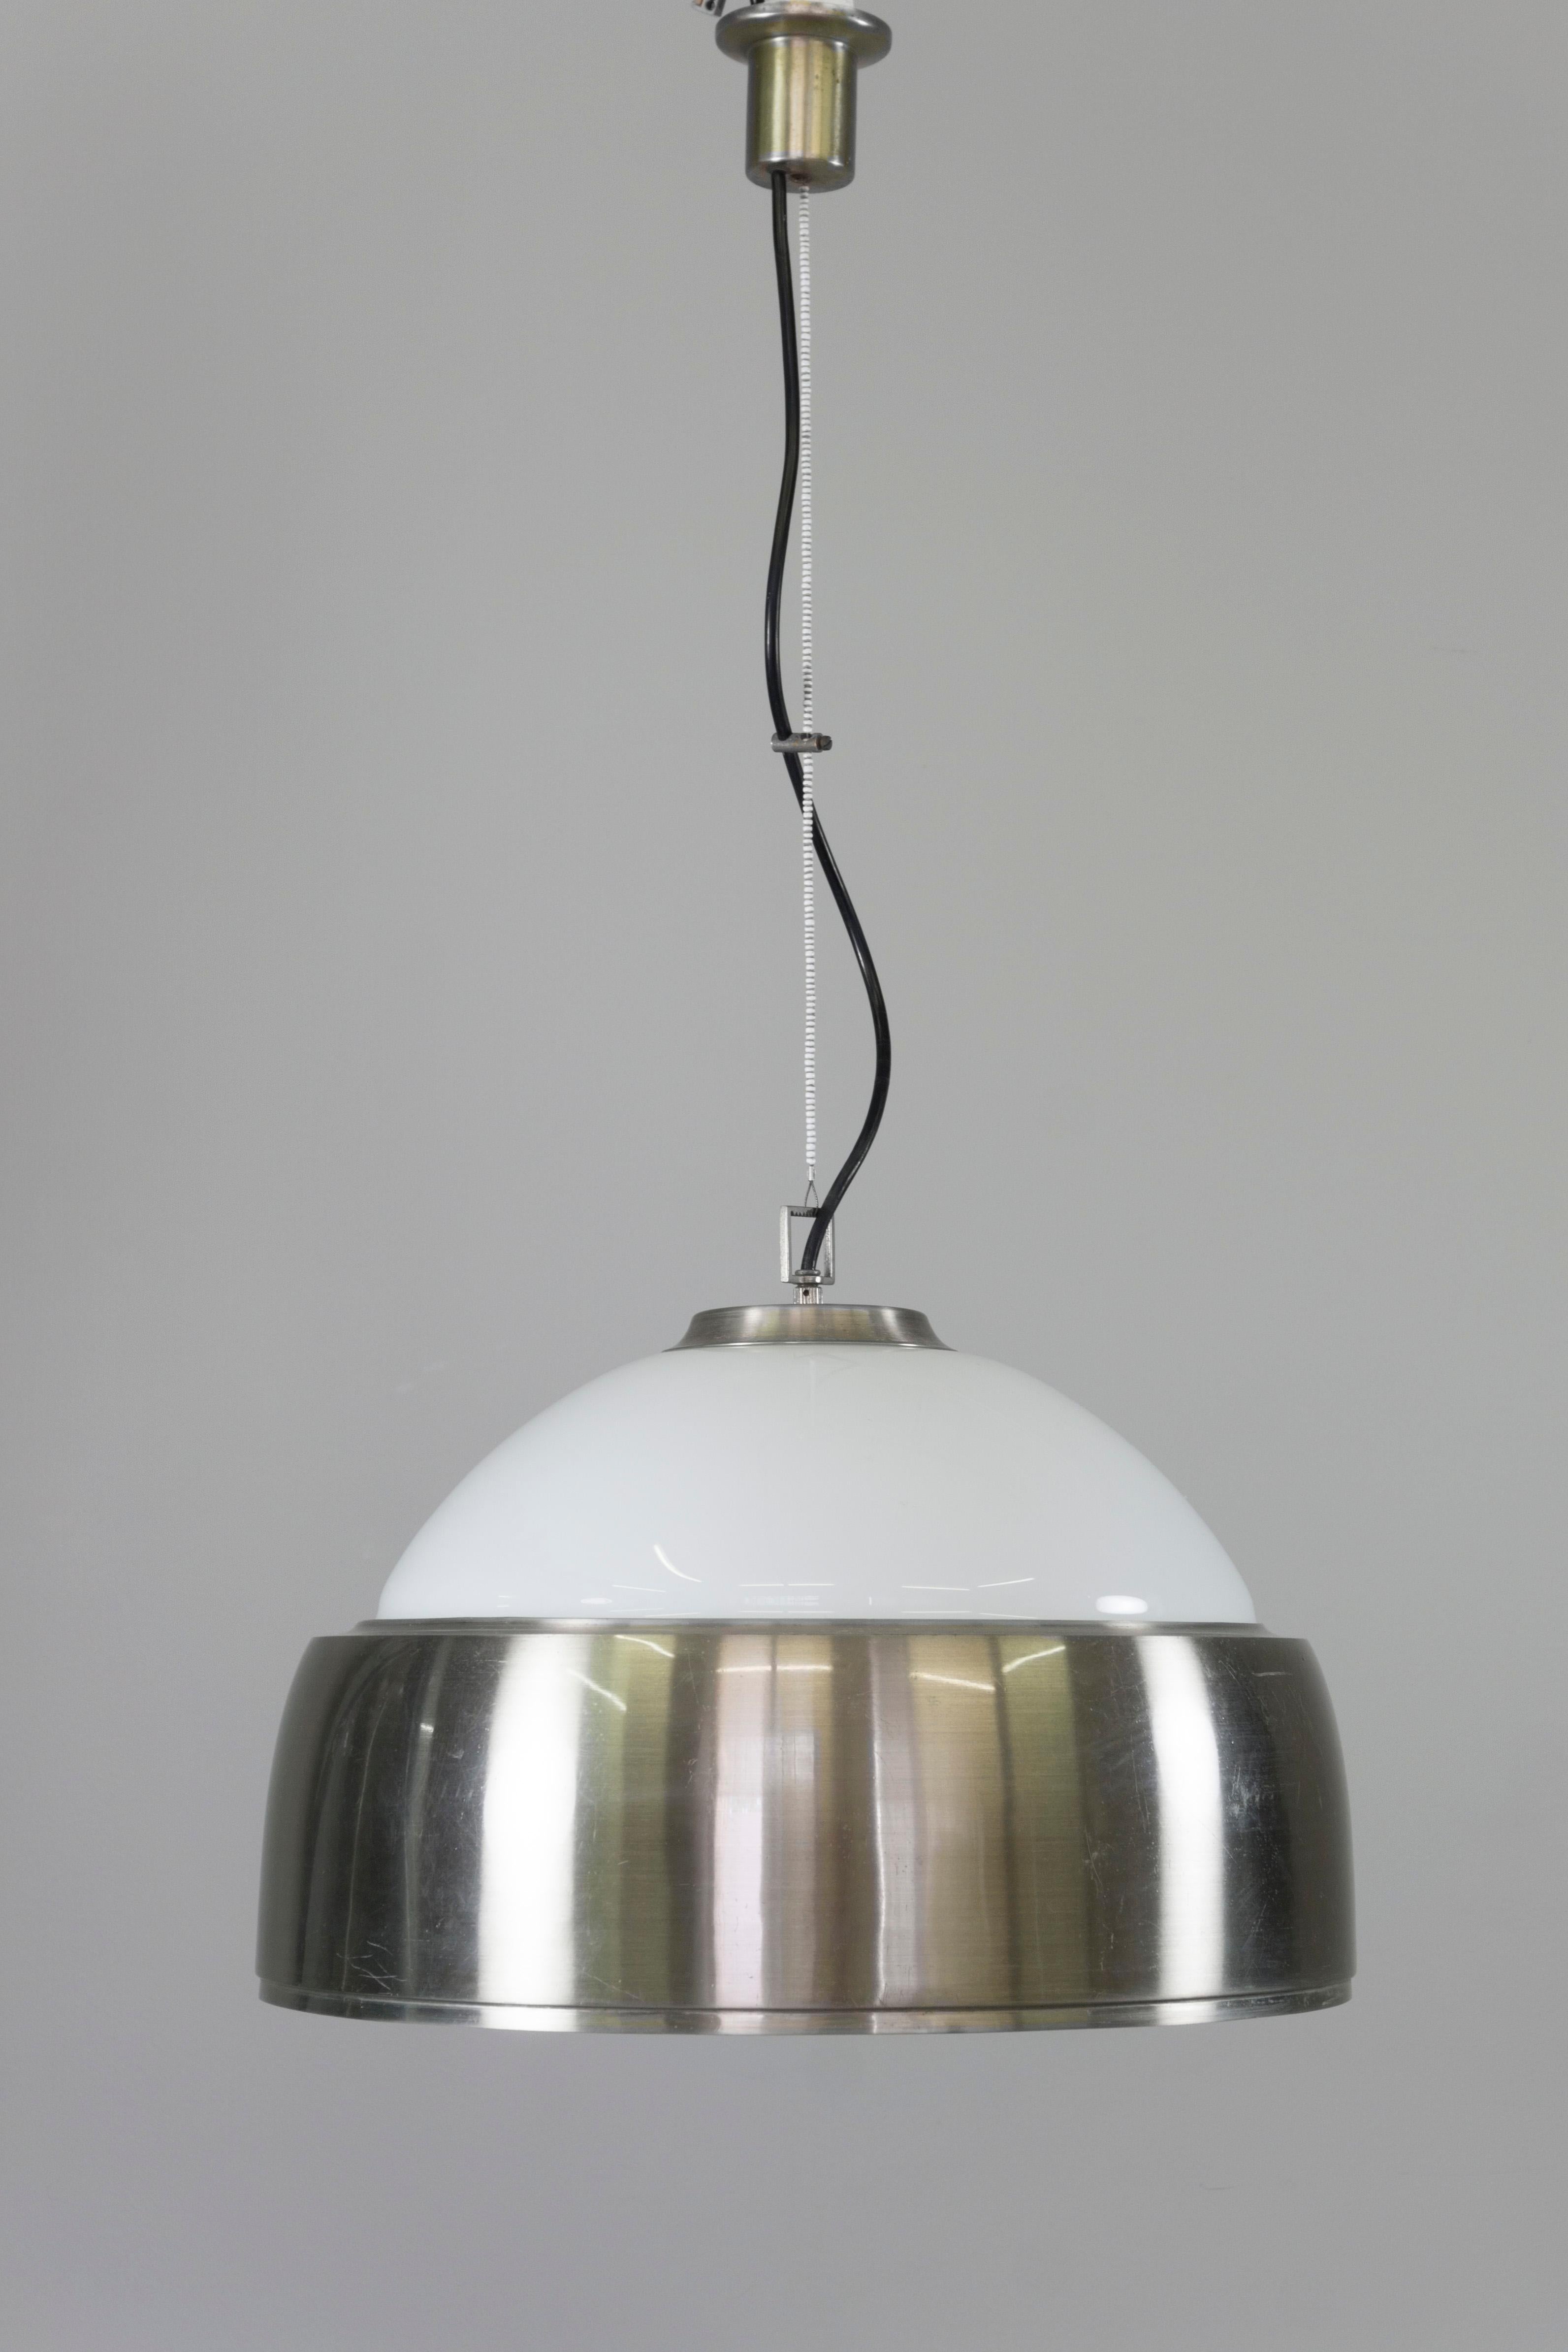 Mid-Century Modern Ceiling Lamp by Alessandro Pianon, 1965 For Sale